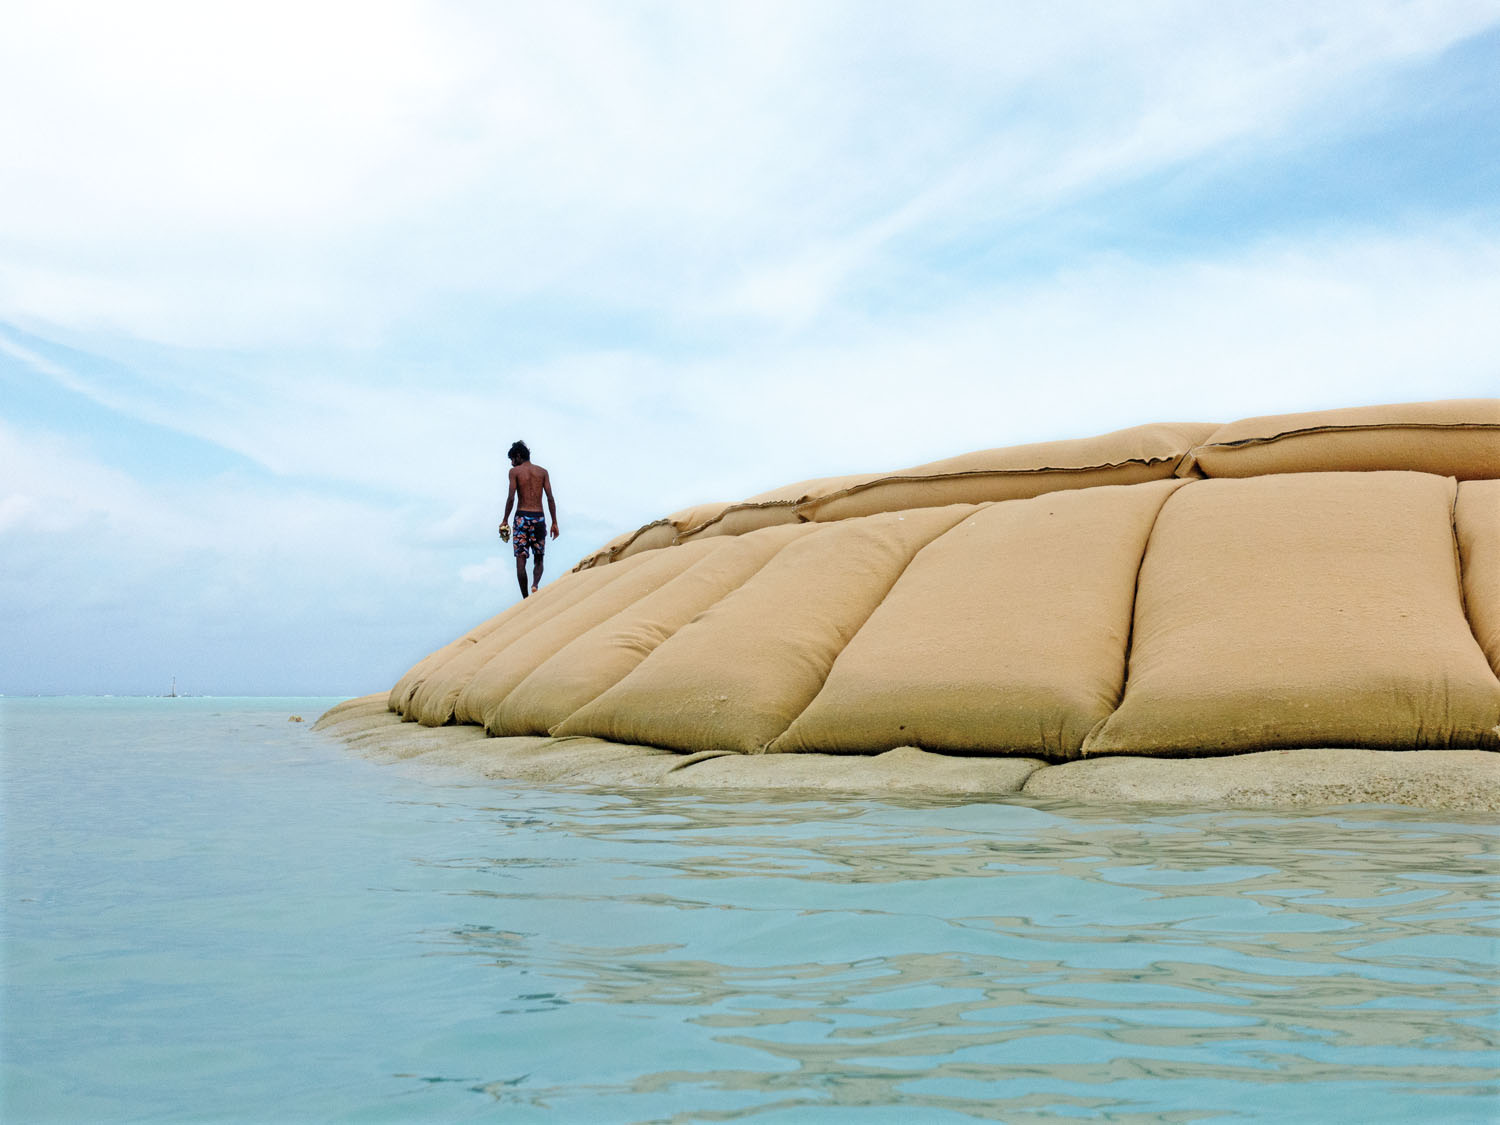 Ahmed Aiham, a local environmental activist, walks over a dike of geotextile bags protecting a land-reclamation project on the island of Fulhadhoo.